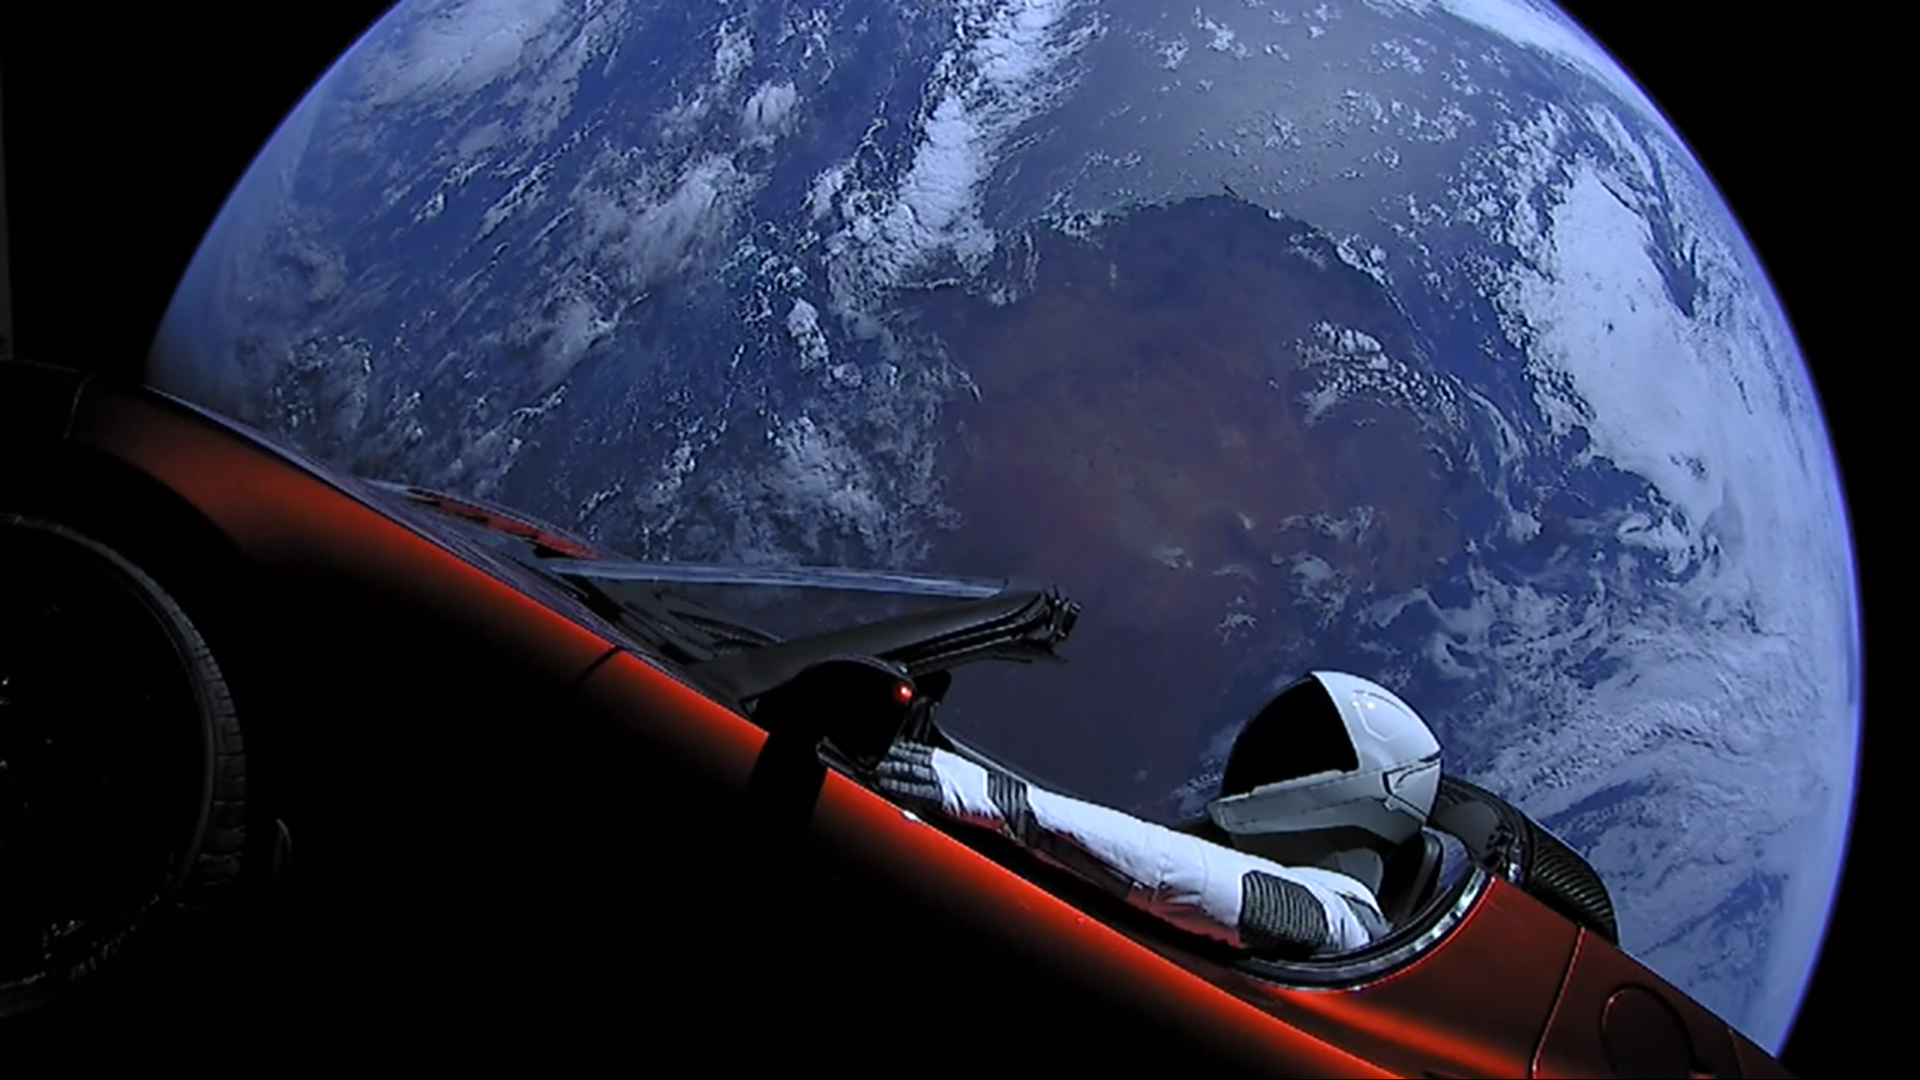 Tesla Roadster has close approach with Mars